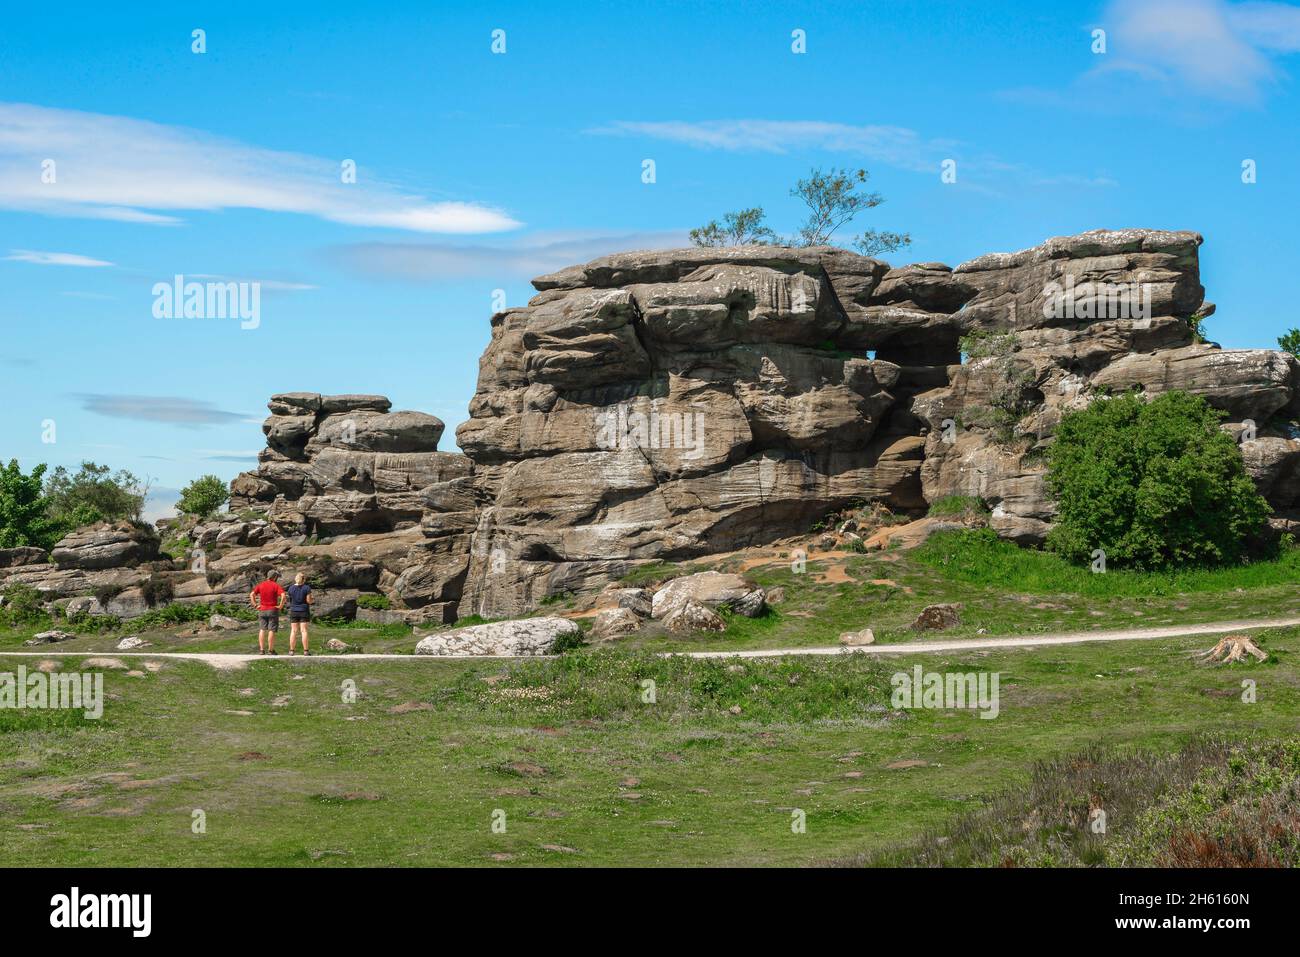 Brimham Rocks, view in summer of a young couple looking at heavily eroded rock formations at Brimham Rocks in Nidderdale, North Yorkshire, England UK Stock Photo